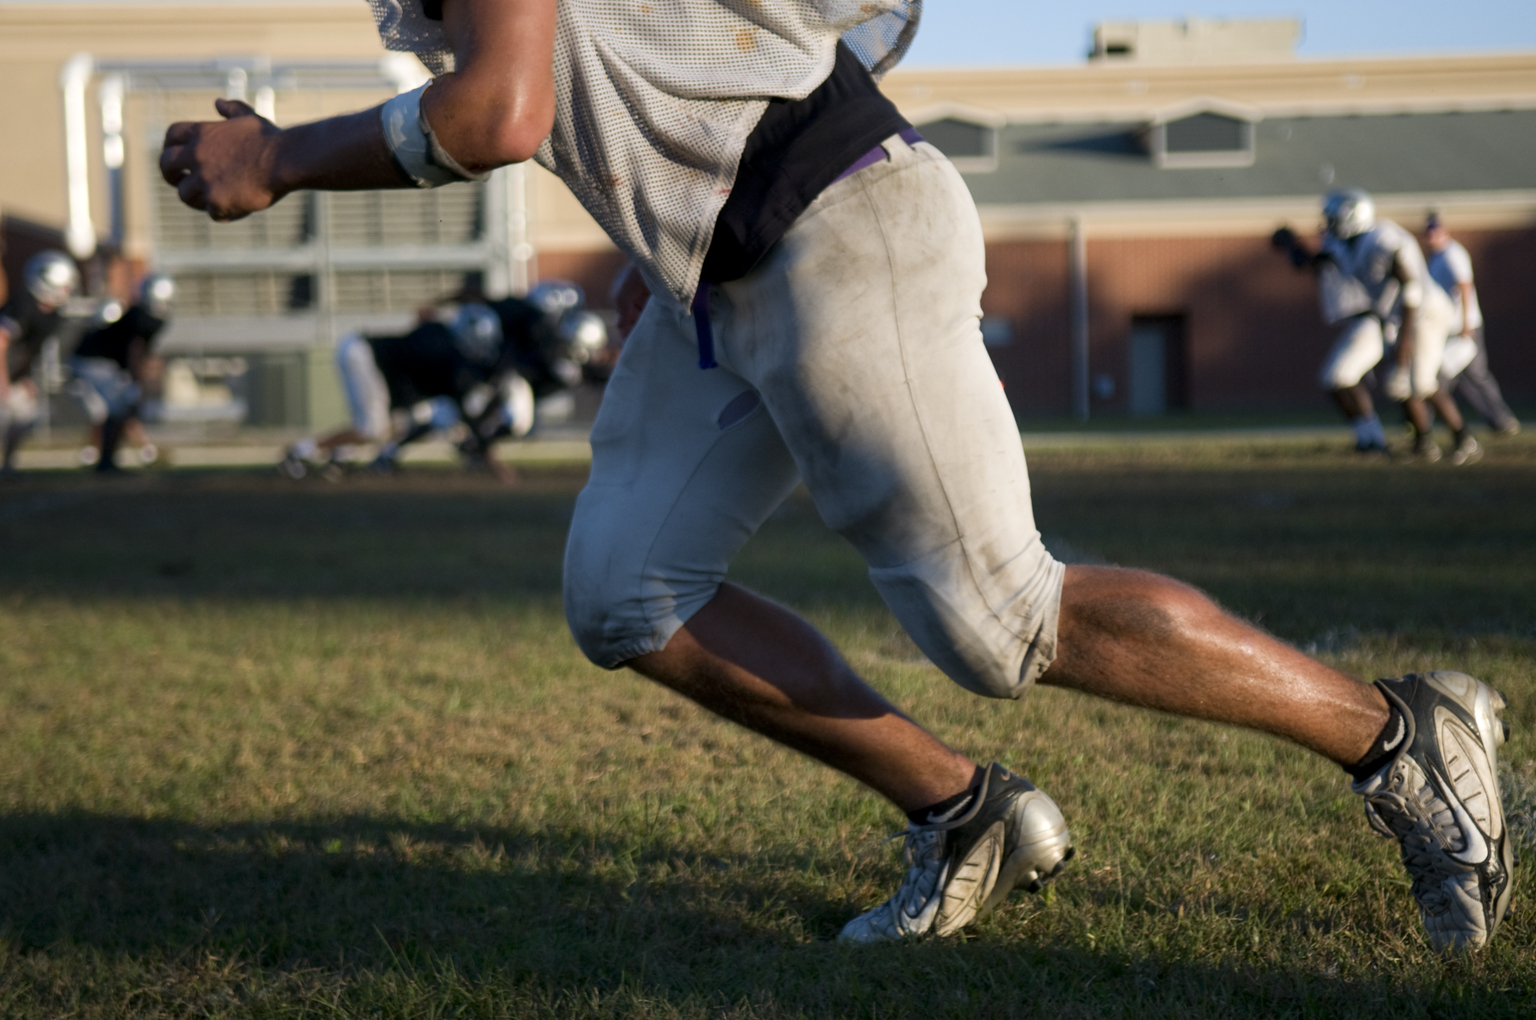 Surgery, rehab often not enough after ACL injury | Dr. David Geier